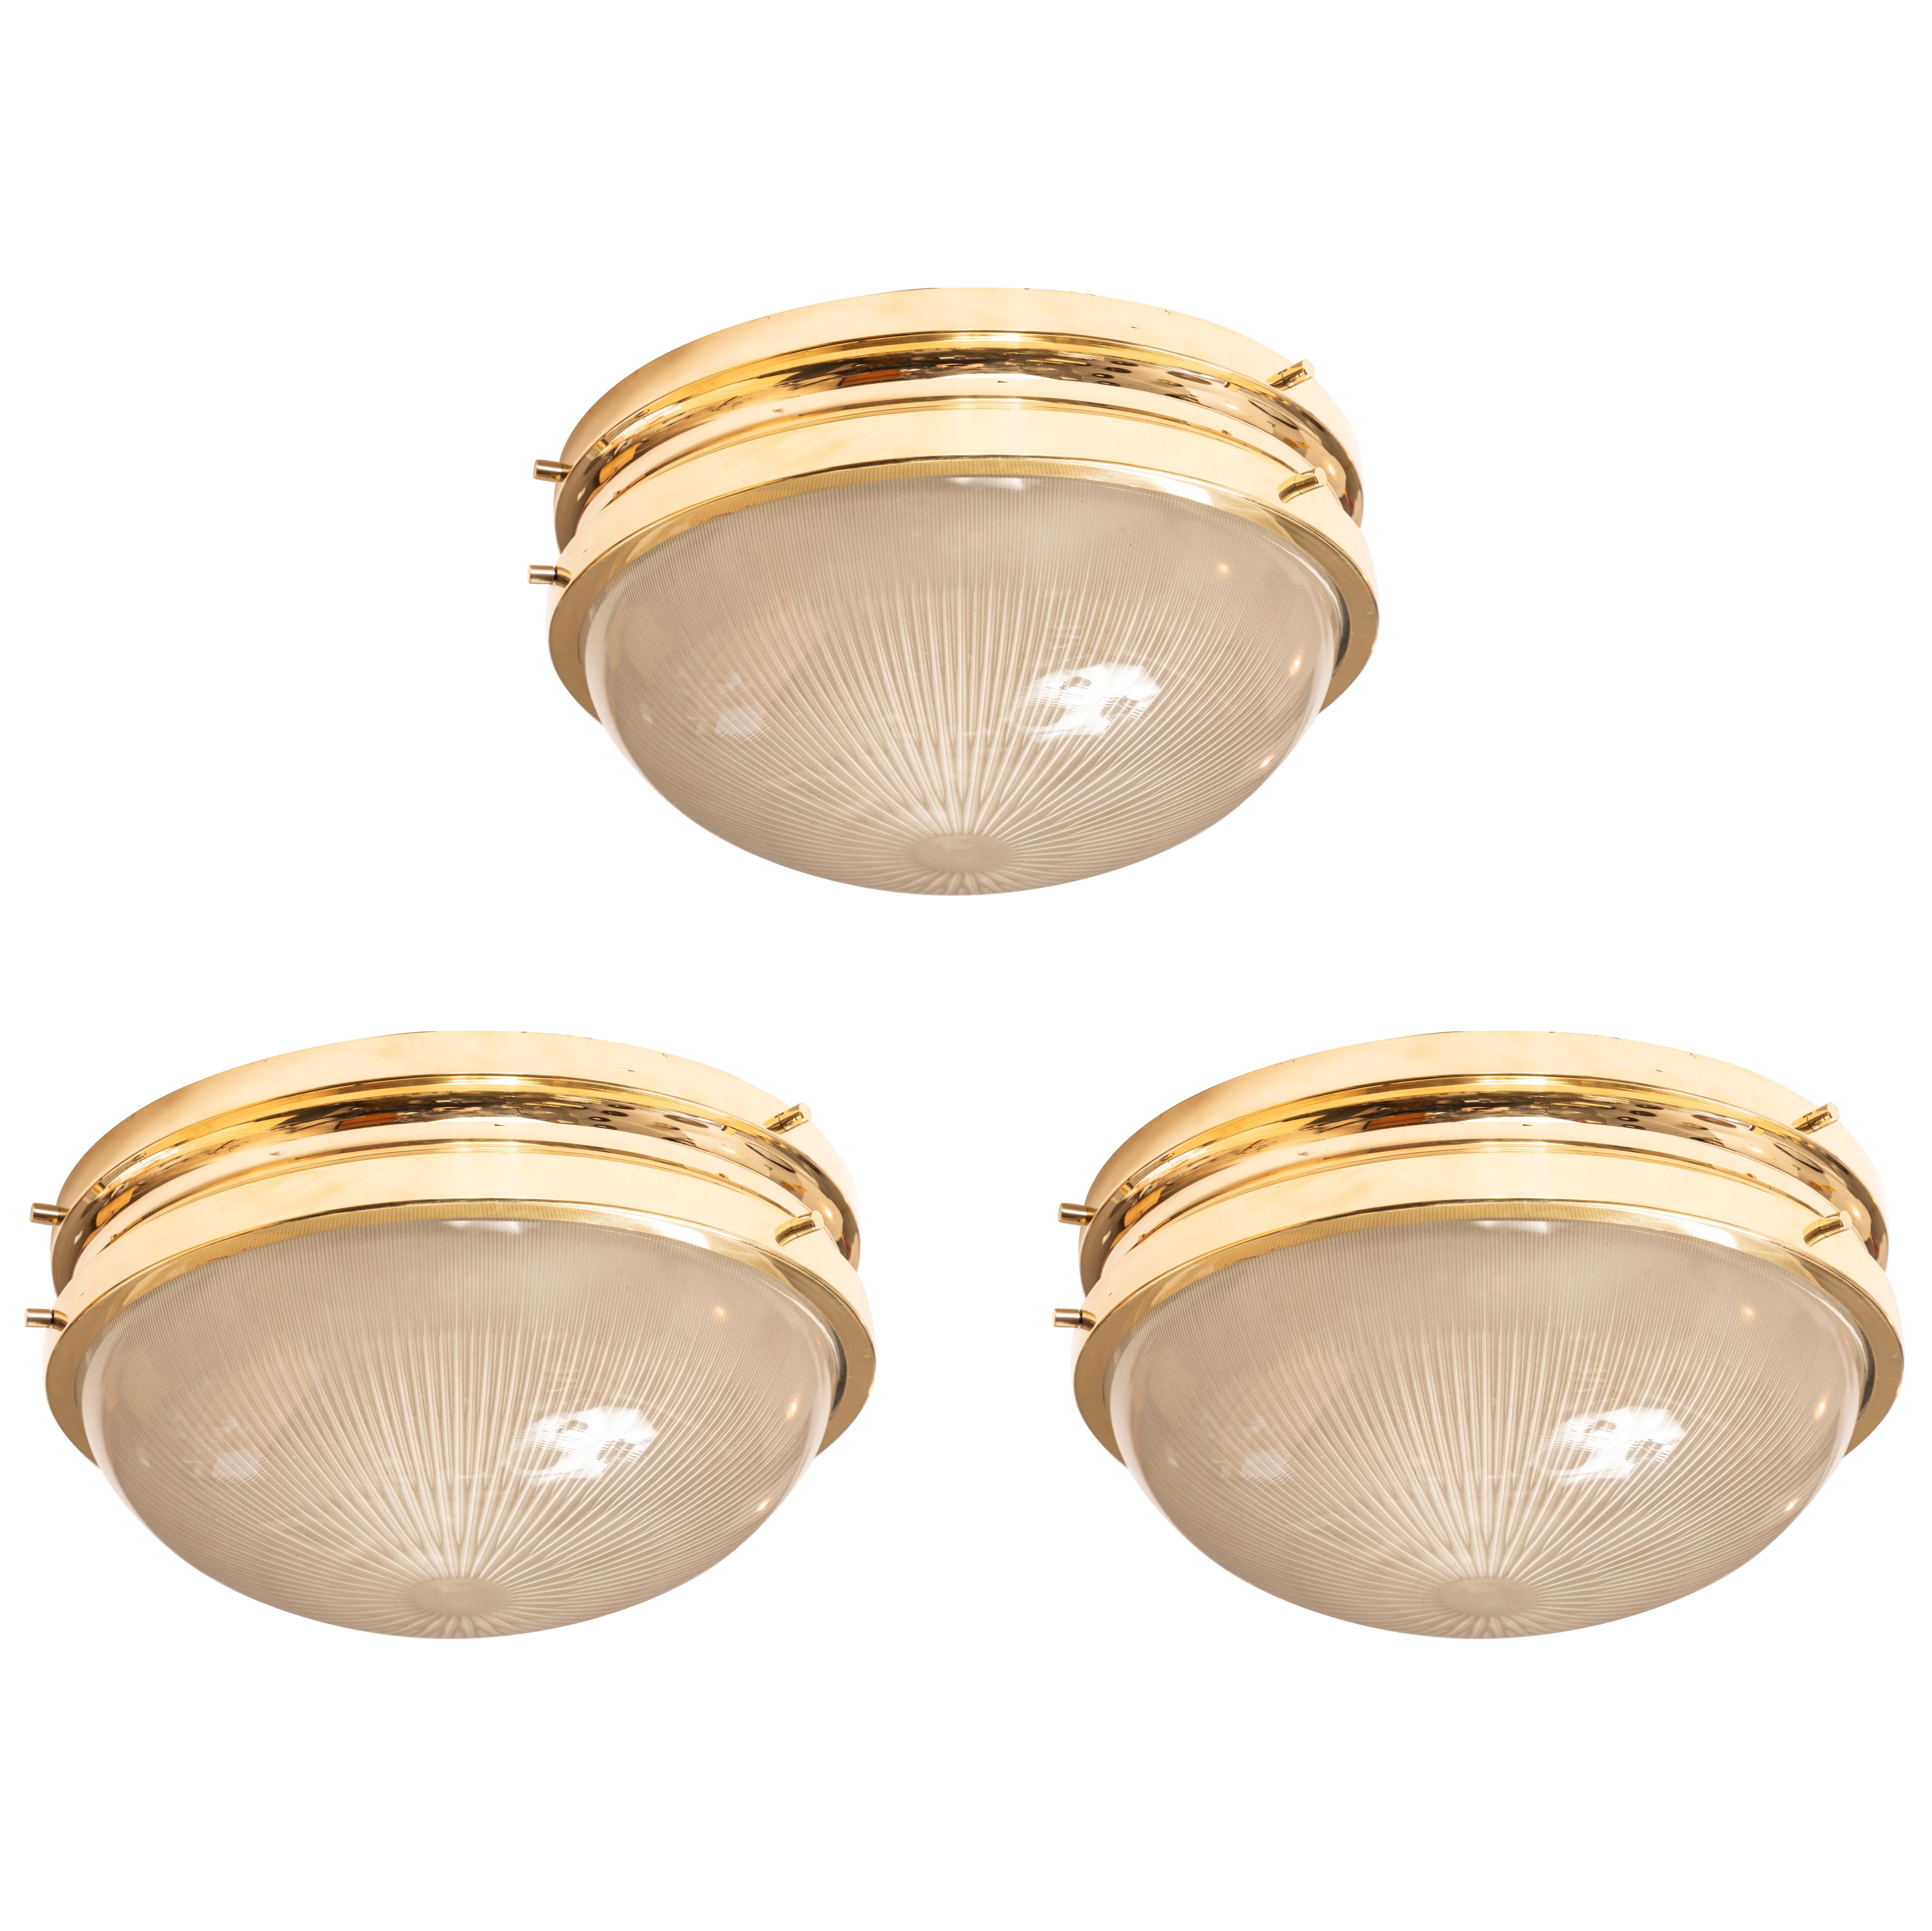 1960s Sergio Mazza Brass 'Sigma' wall or ceiling lights for Artemide. Executed in polished brass and pressed opaline glass by Sergio Mazza for Artemide, Italy, circa 1960s. Professionally rewired for US electrical and accommodates two standard